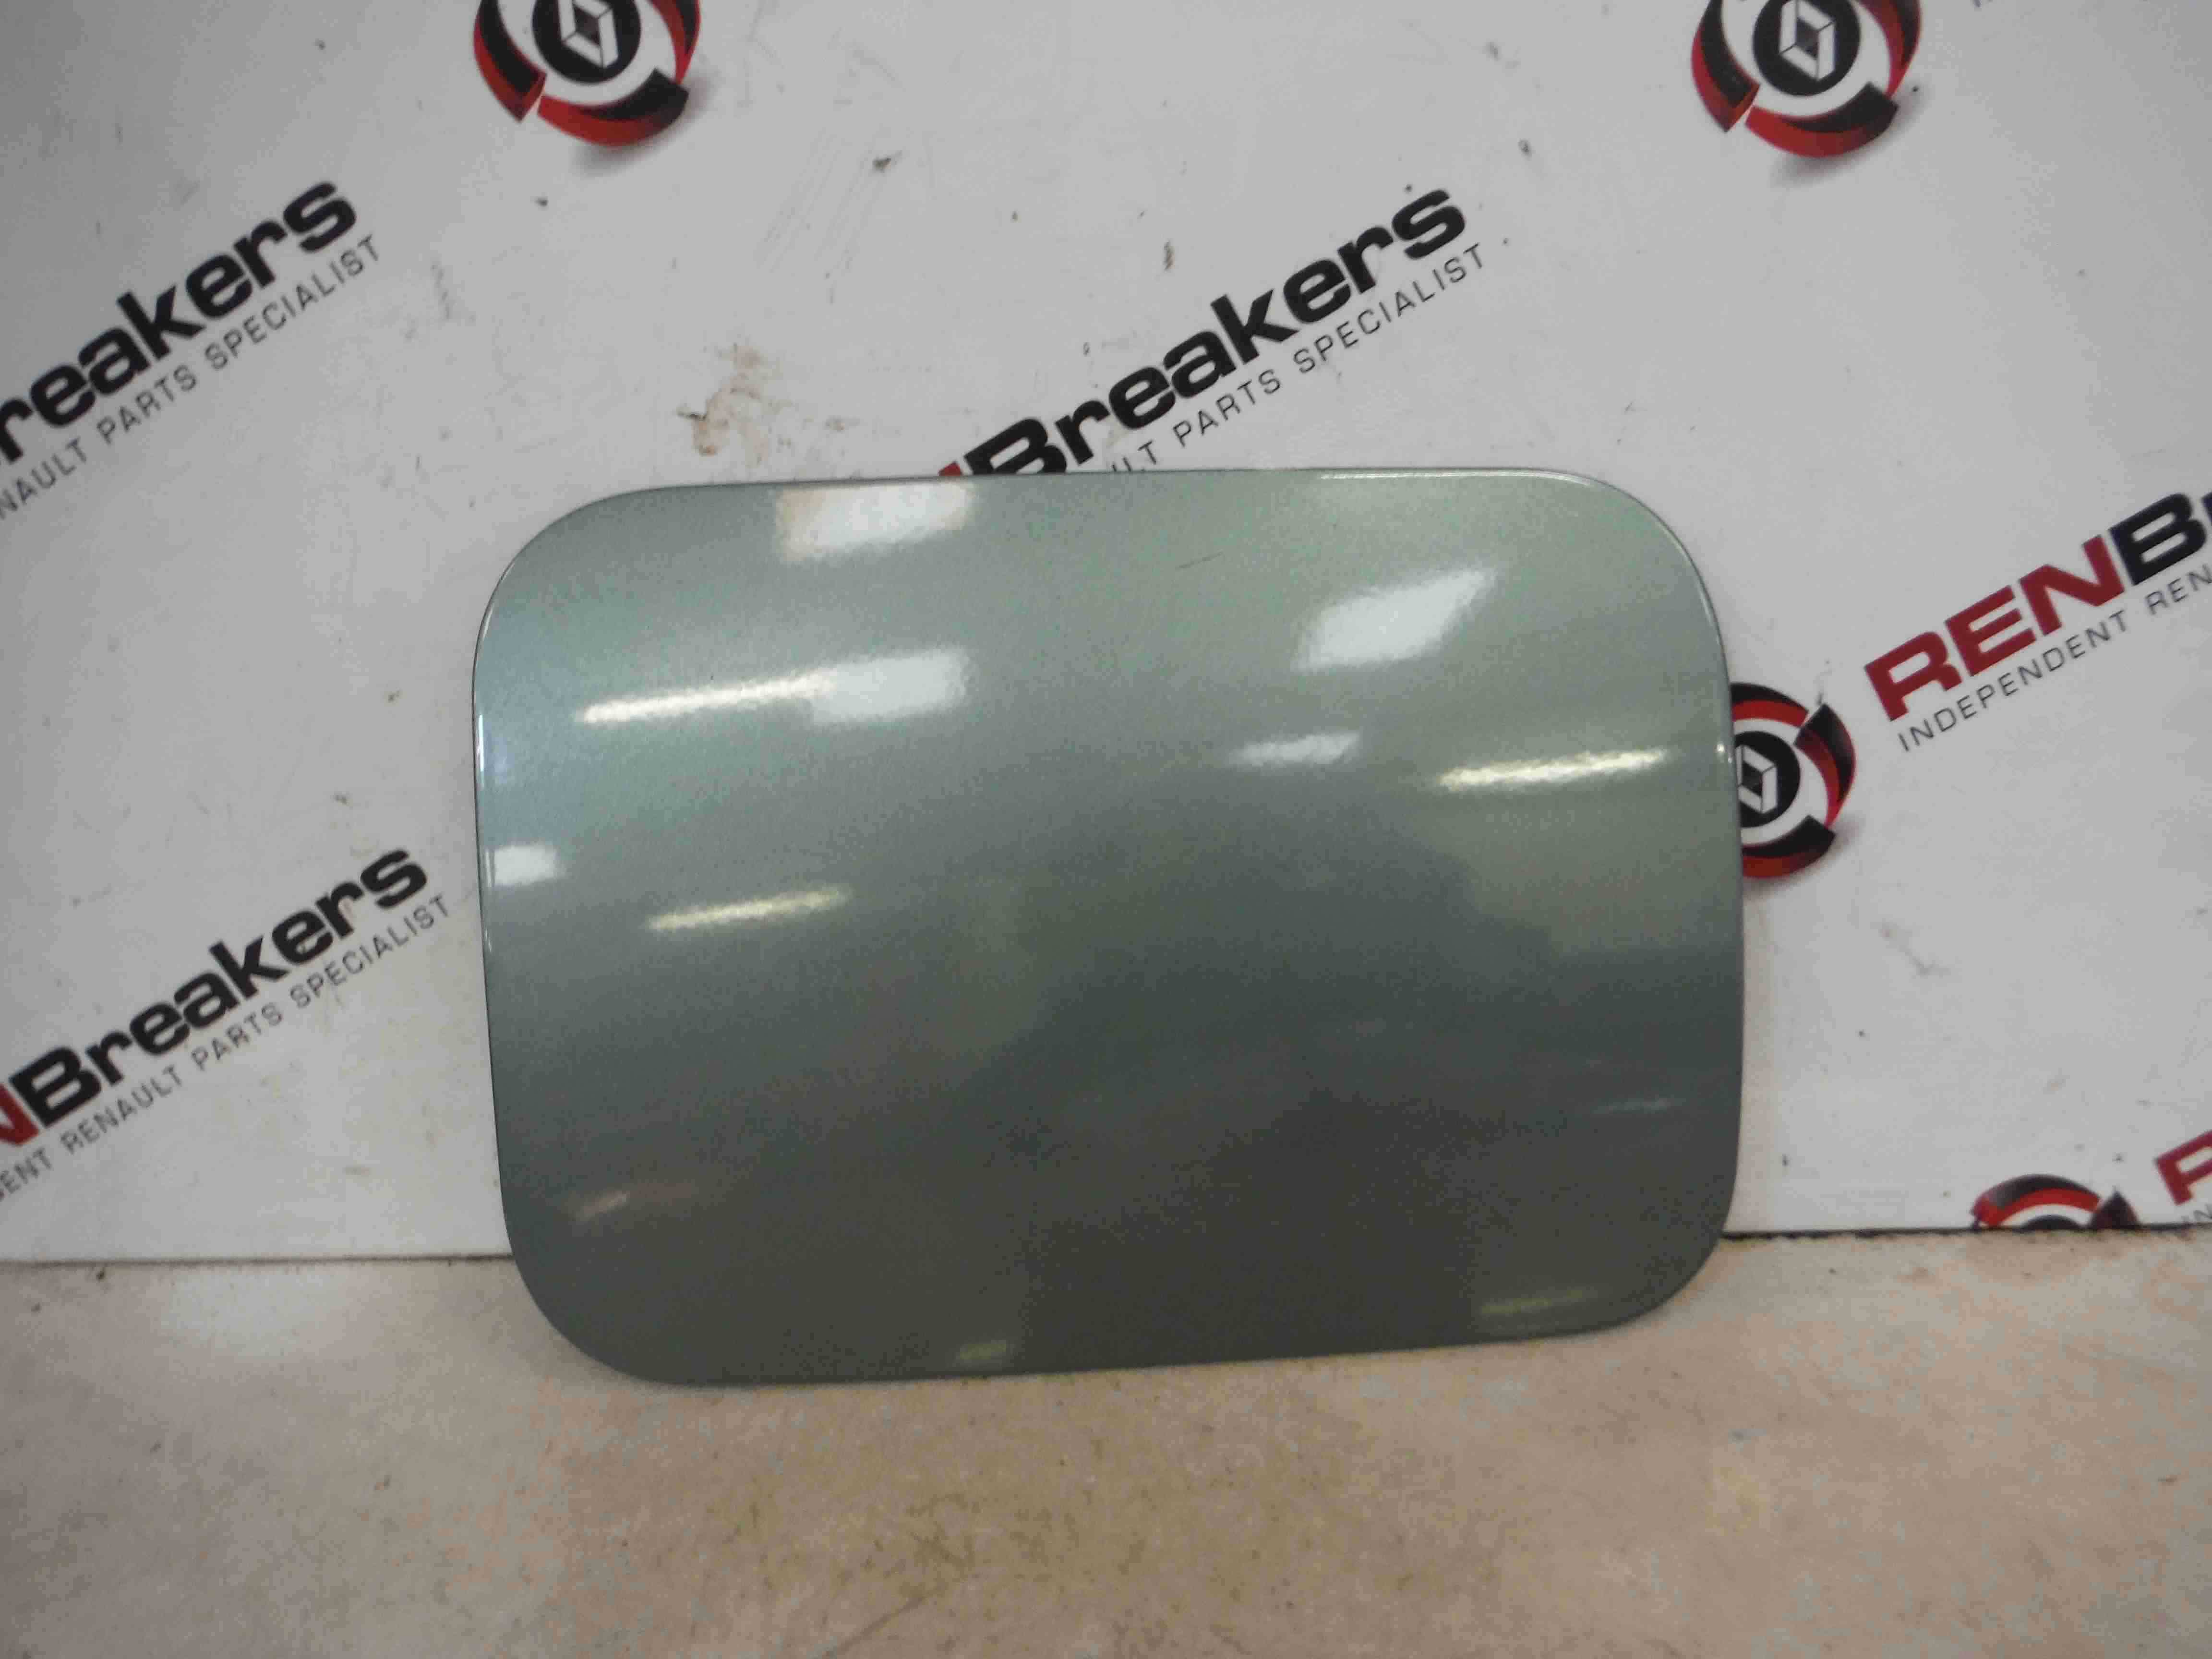 Renault Megane 2002-2008 Fuel Flap Cover Green TED97 8200073760